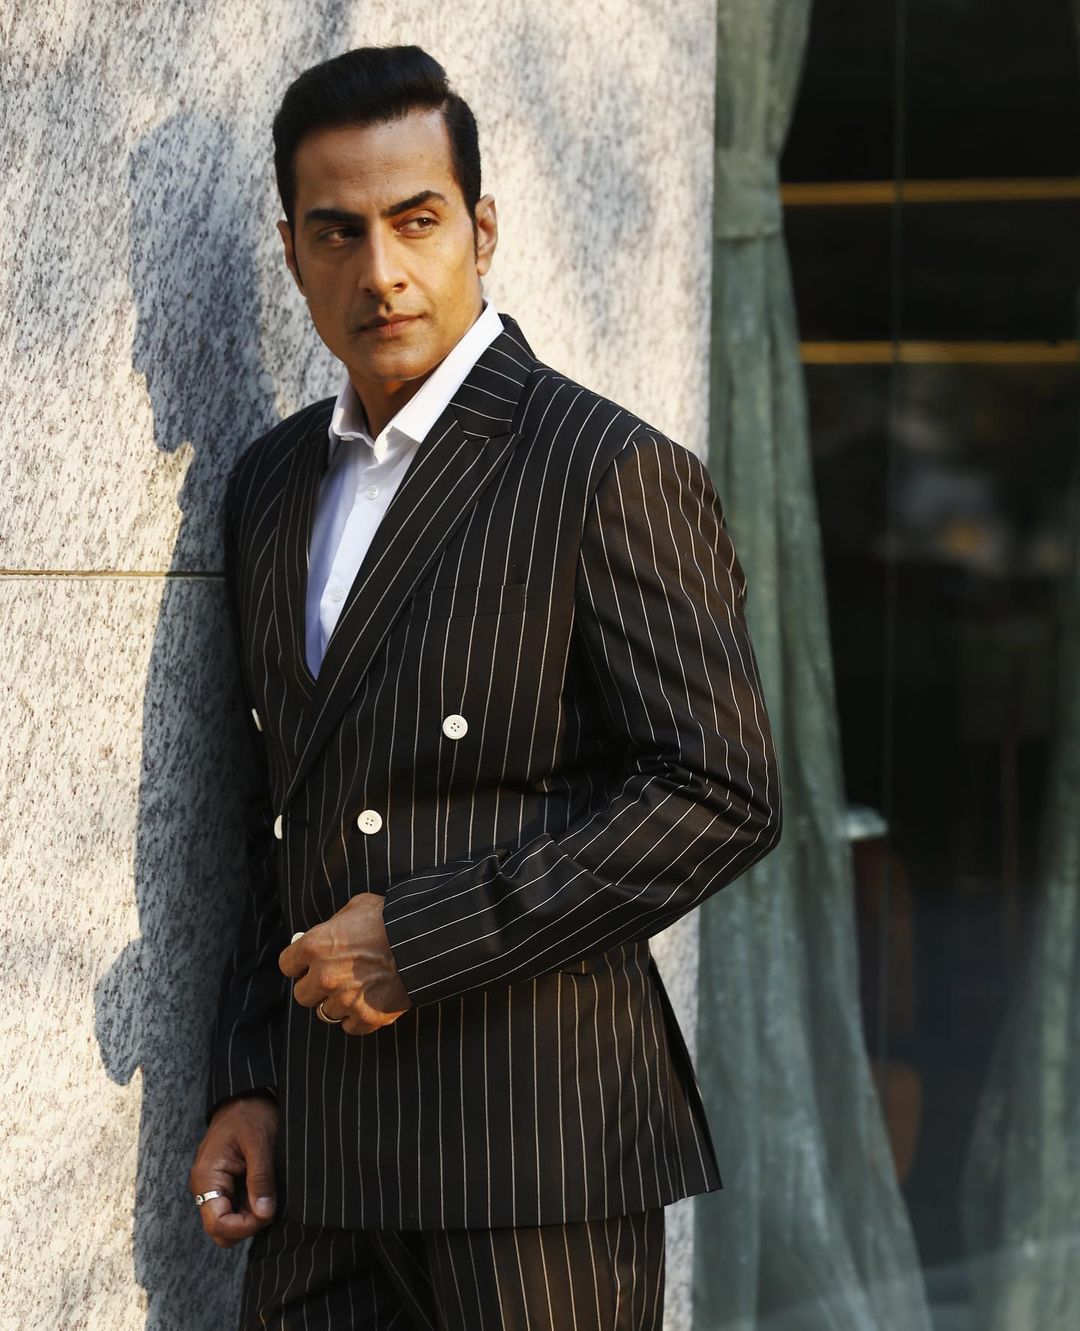 ‘Hateful messages do hit me,’ says Sudhanshu Pandey